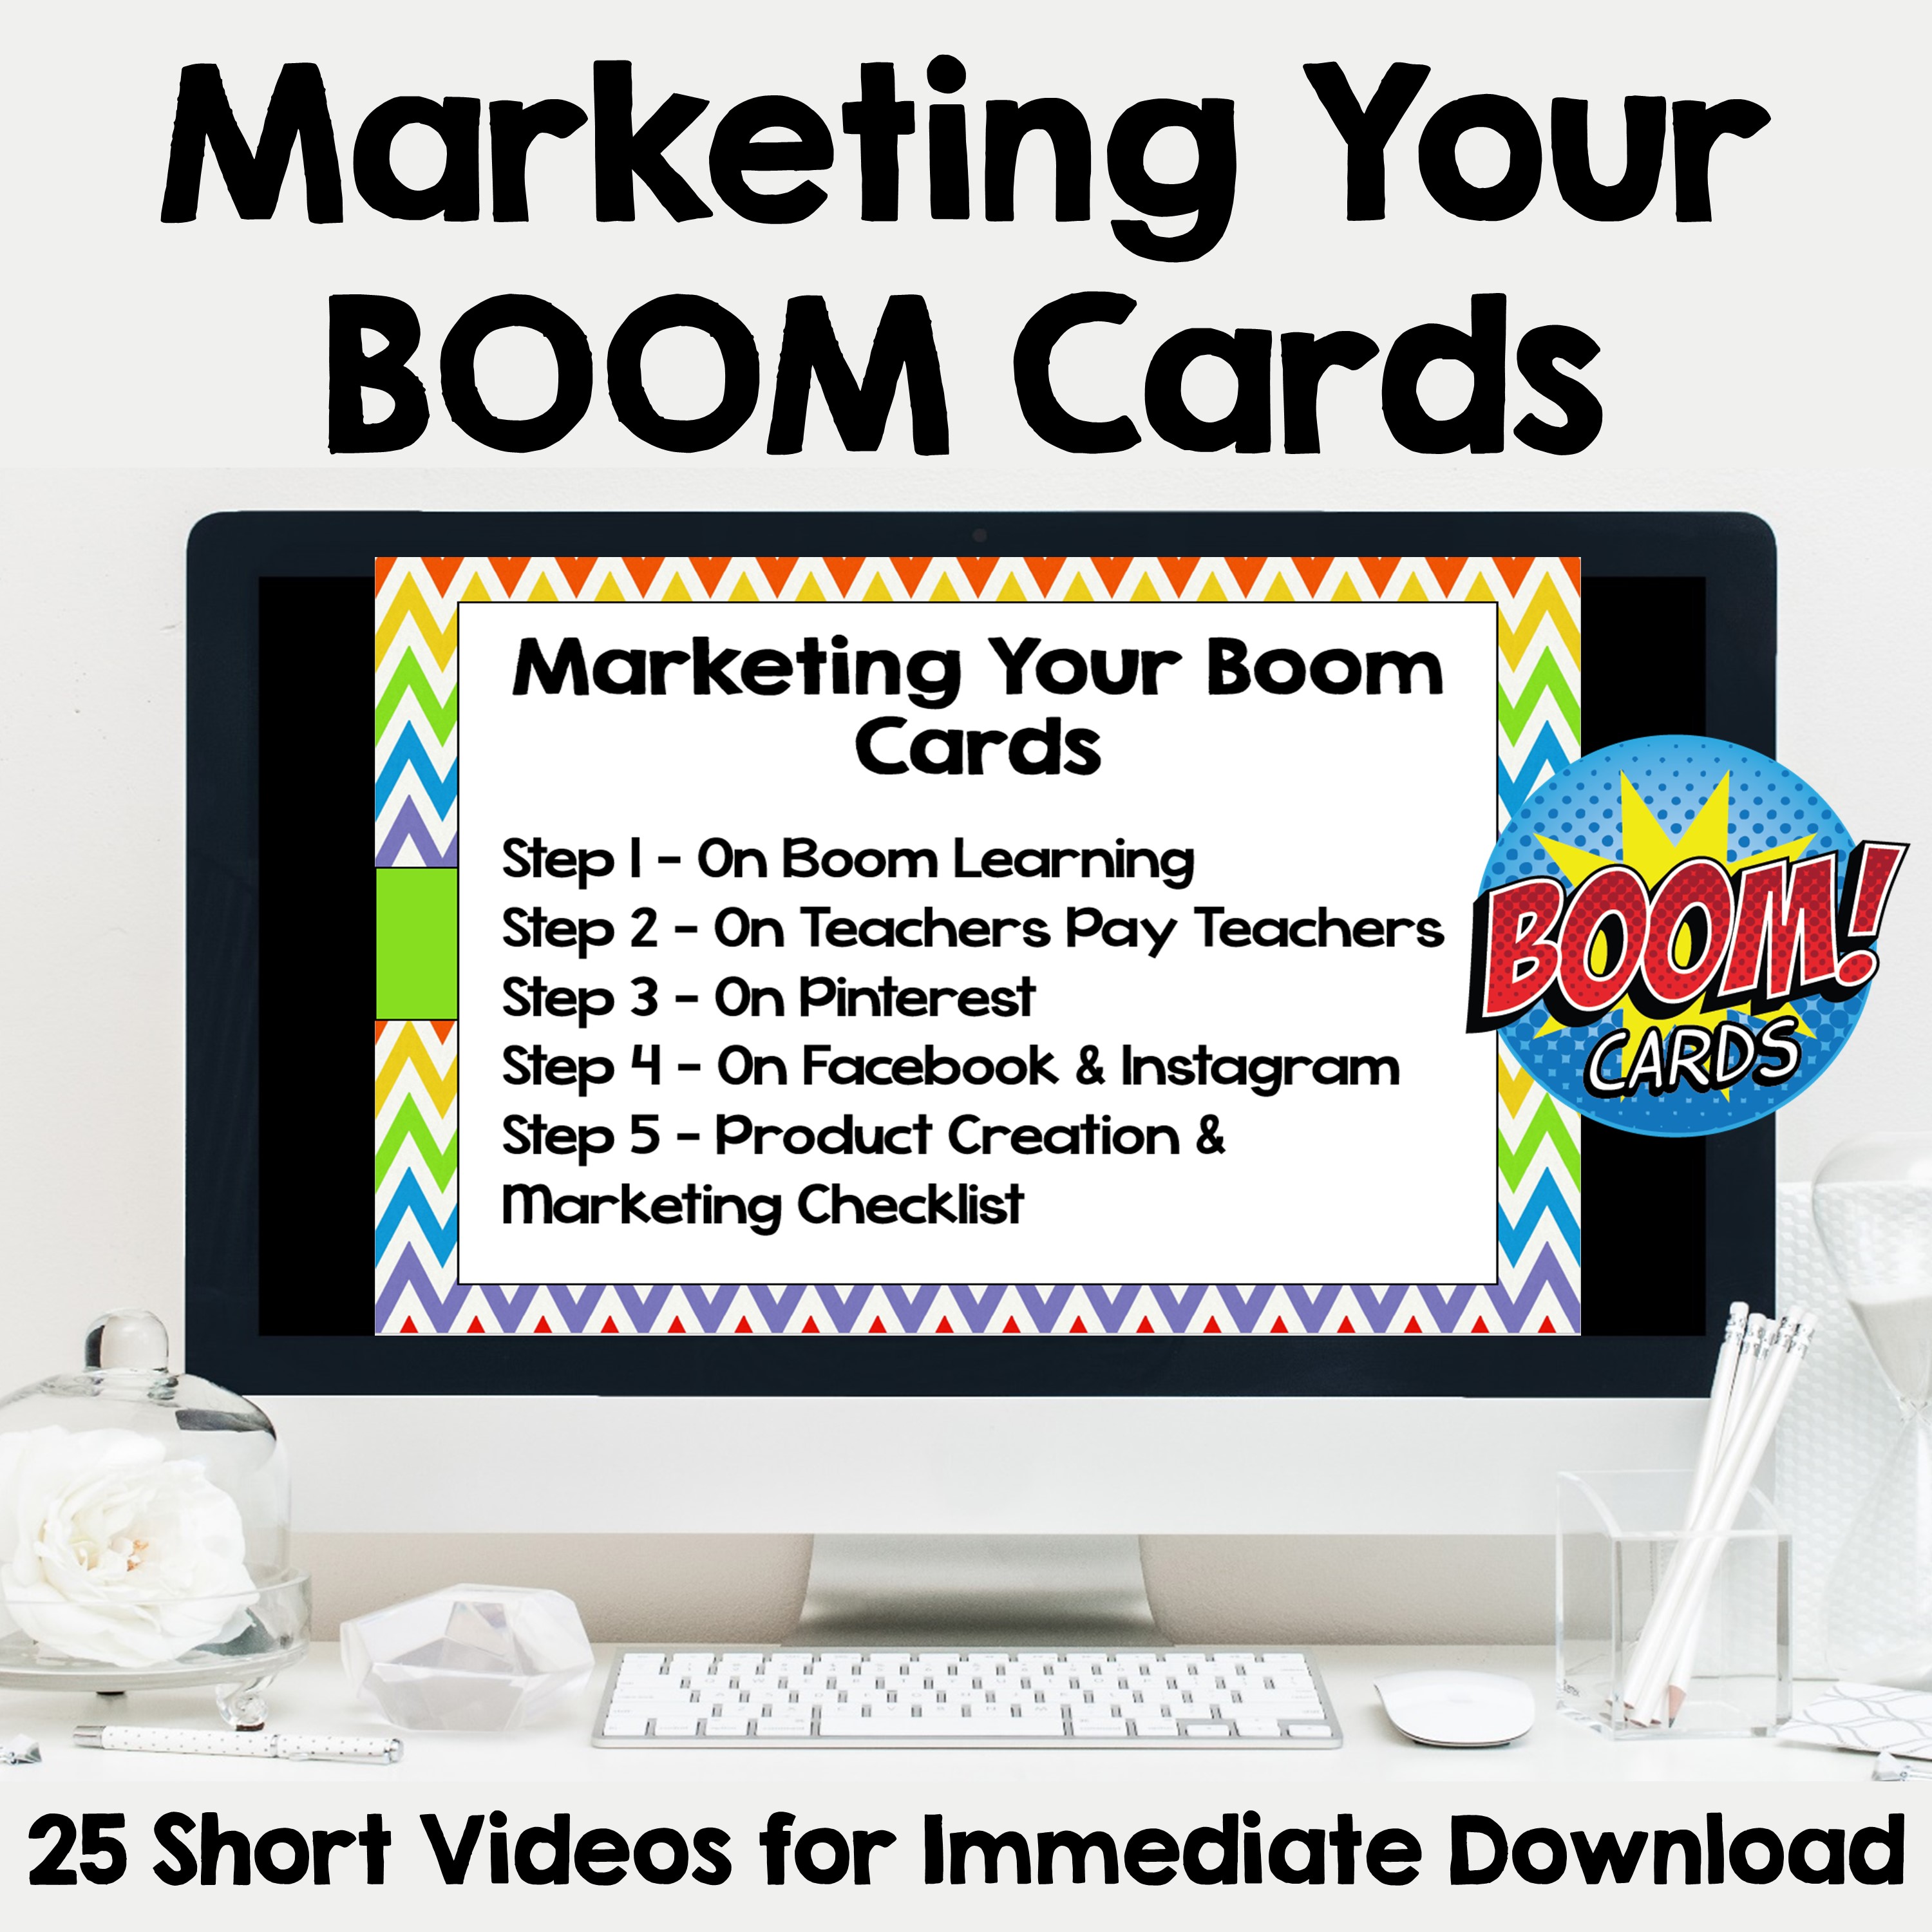 Marketing and Advertising Your Boom Cards